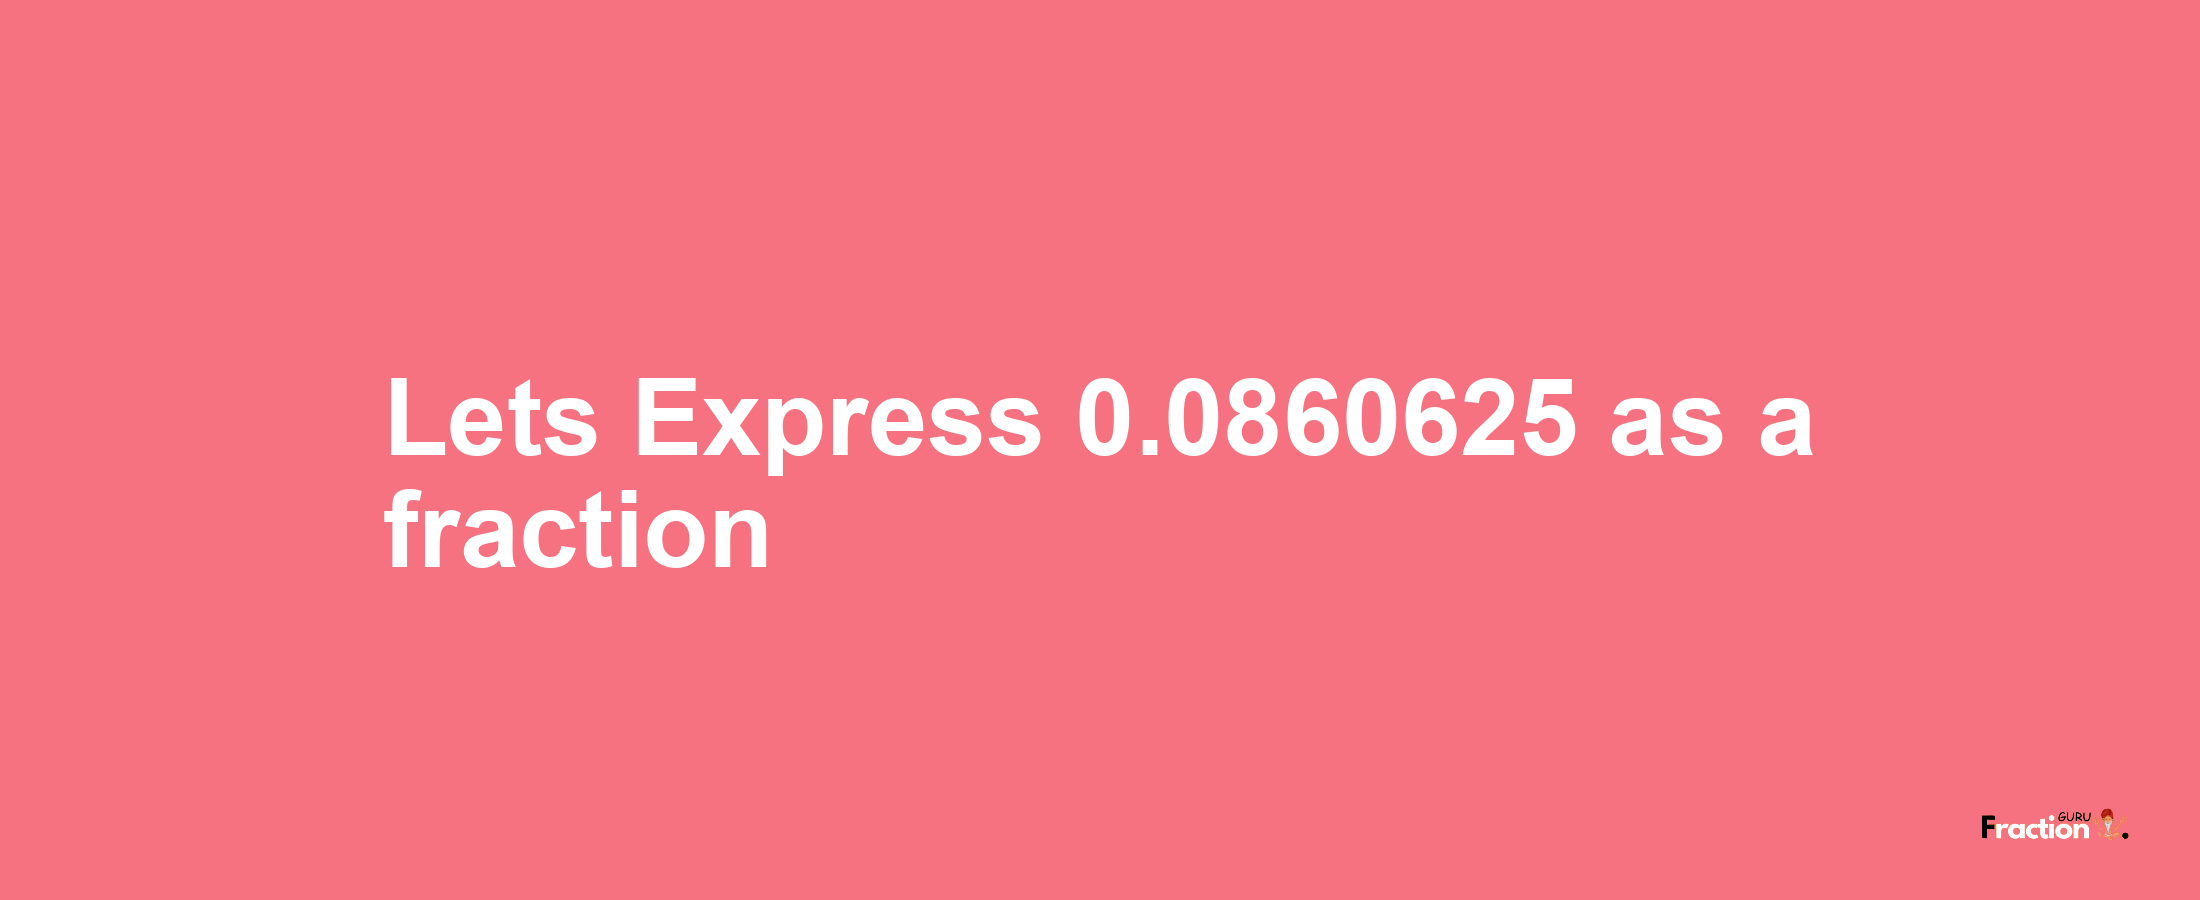 Lets Express 0.0860625 as afraction